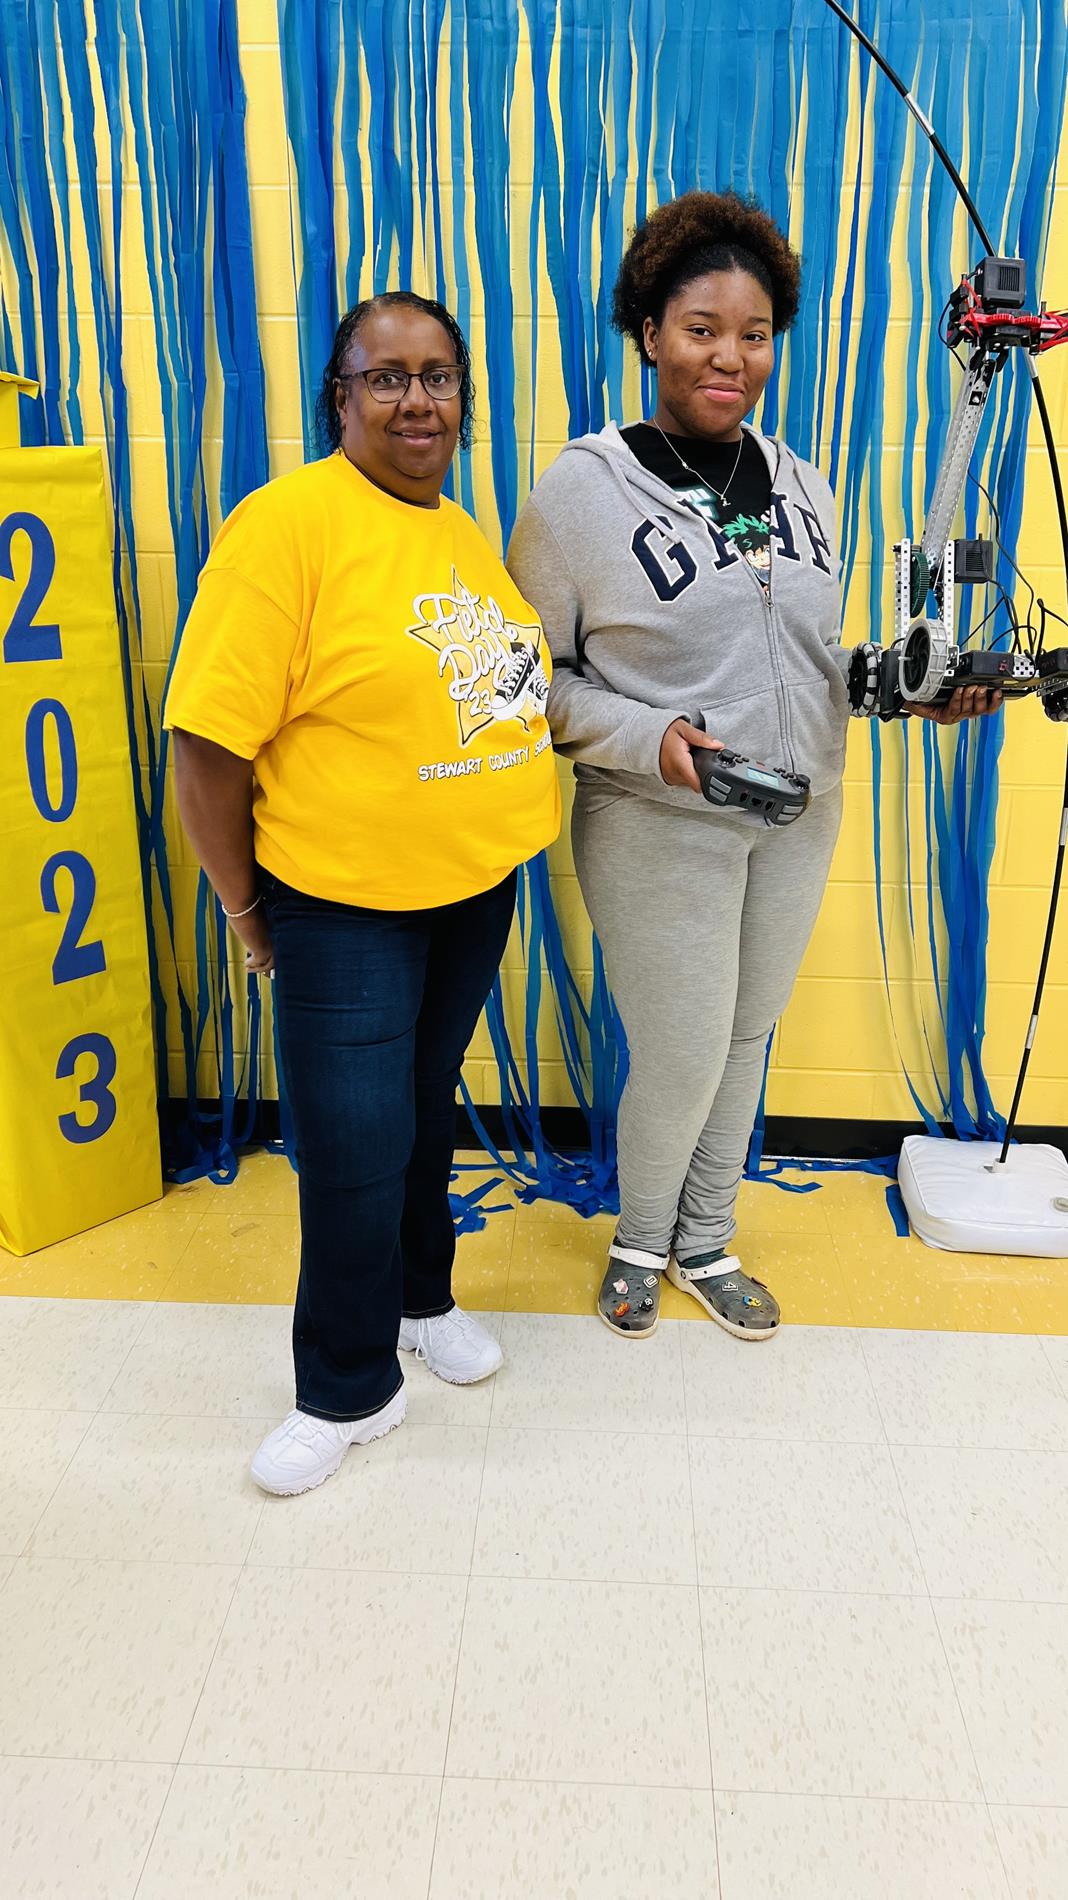 Scholar Z. Spencer with Administrative Assistant Mrs. Rivers